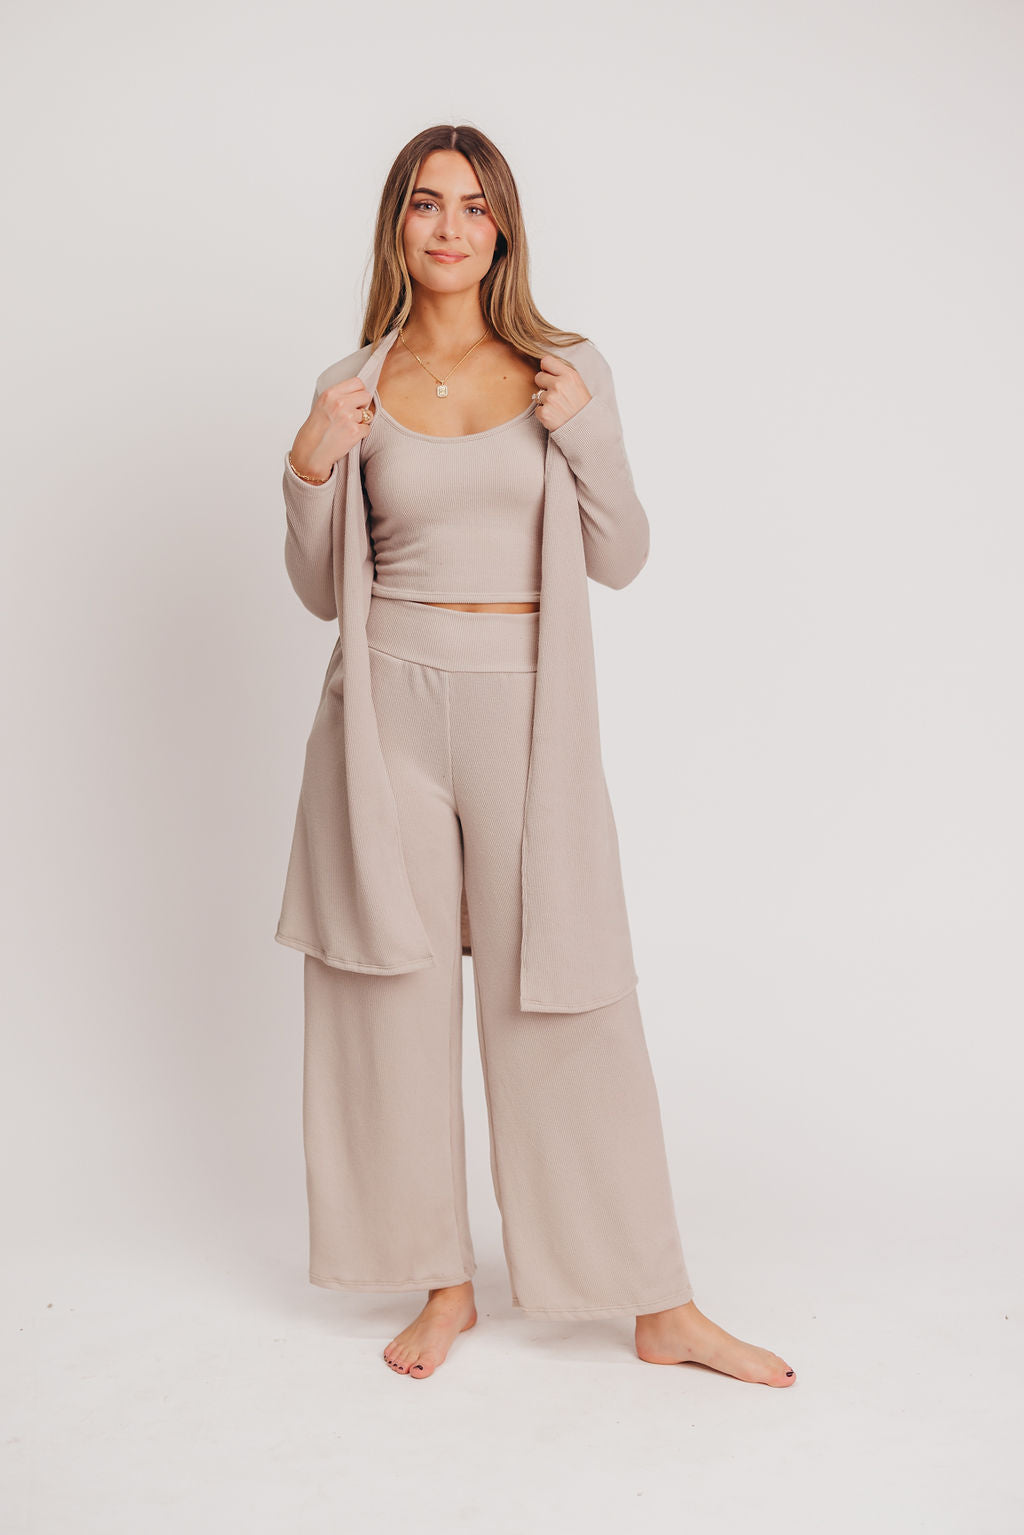 Birdie Ribbed Tank and Wide Leg Pant Set in Khaki - Inclusive Sizing (S-2X)